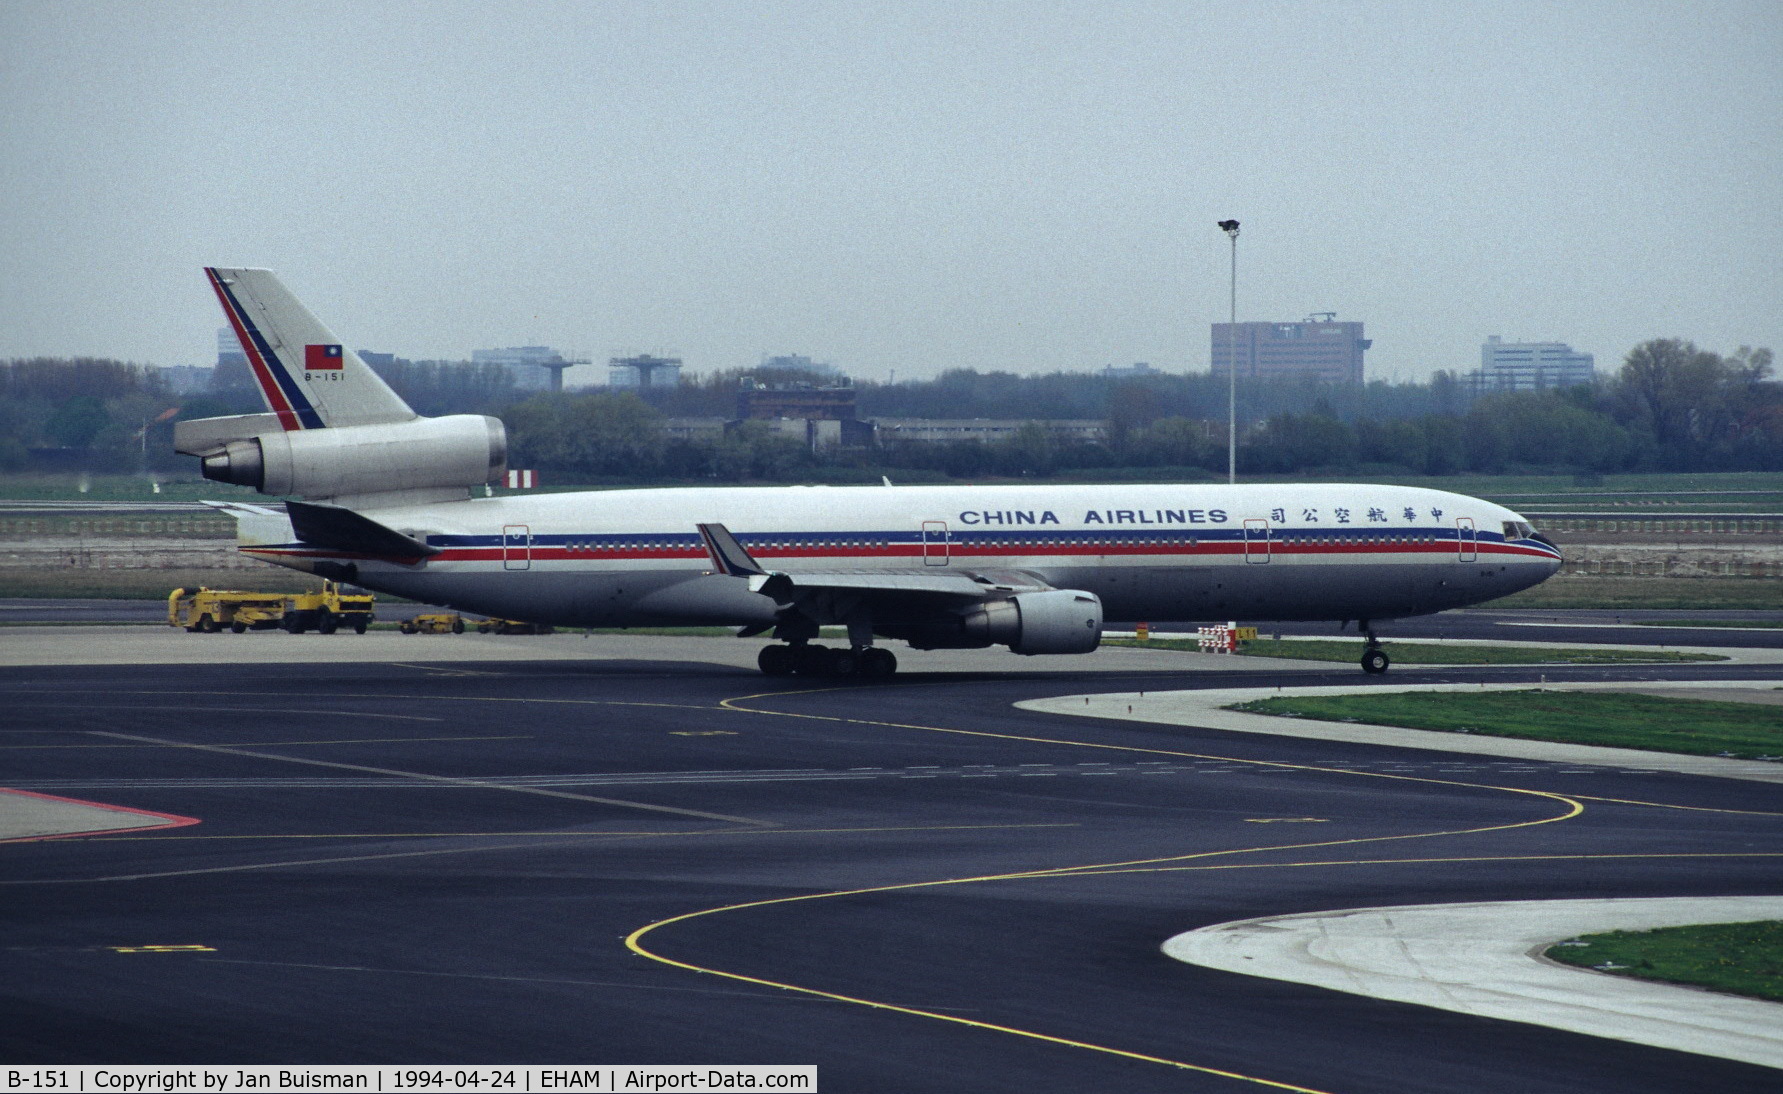 B-151, 1992 McDonnell Douglas MD-11F C/N 48469, China Airlines